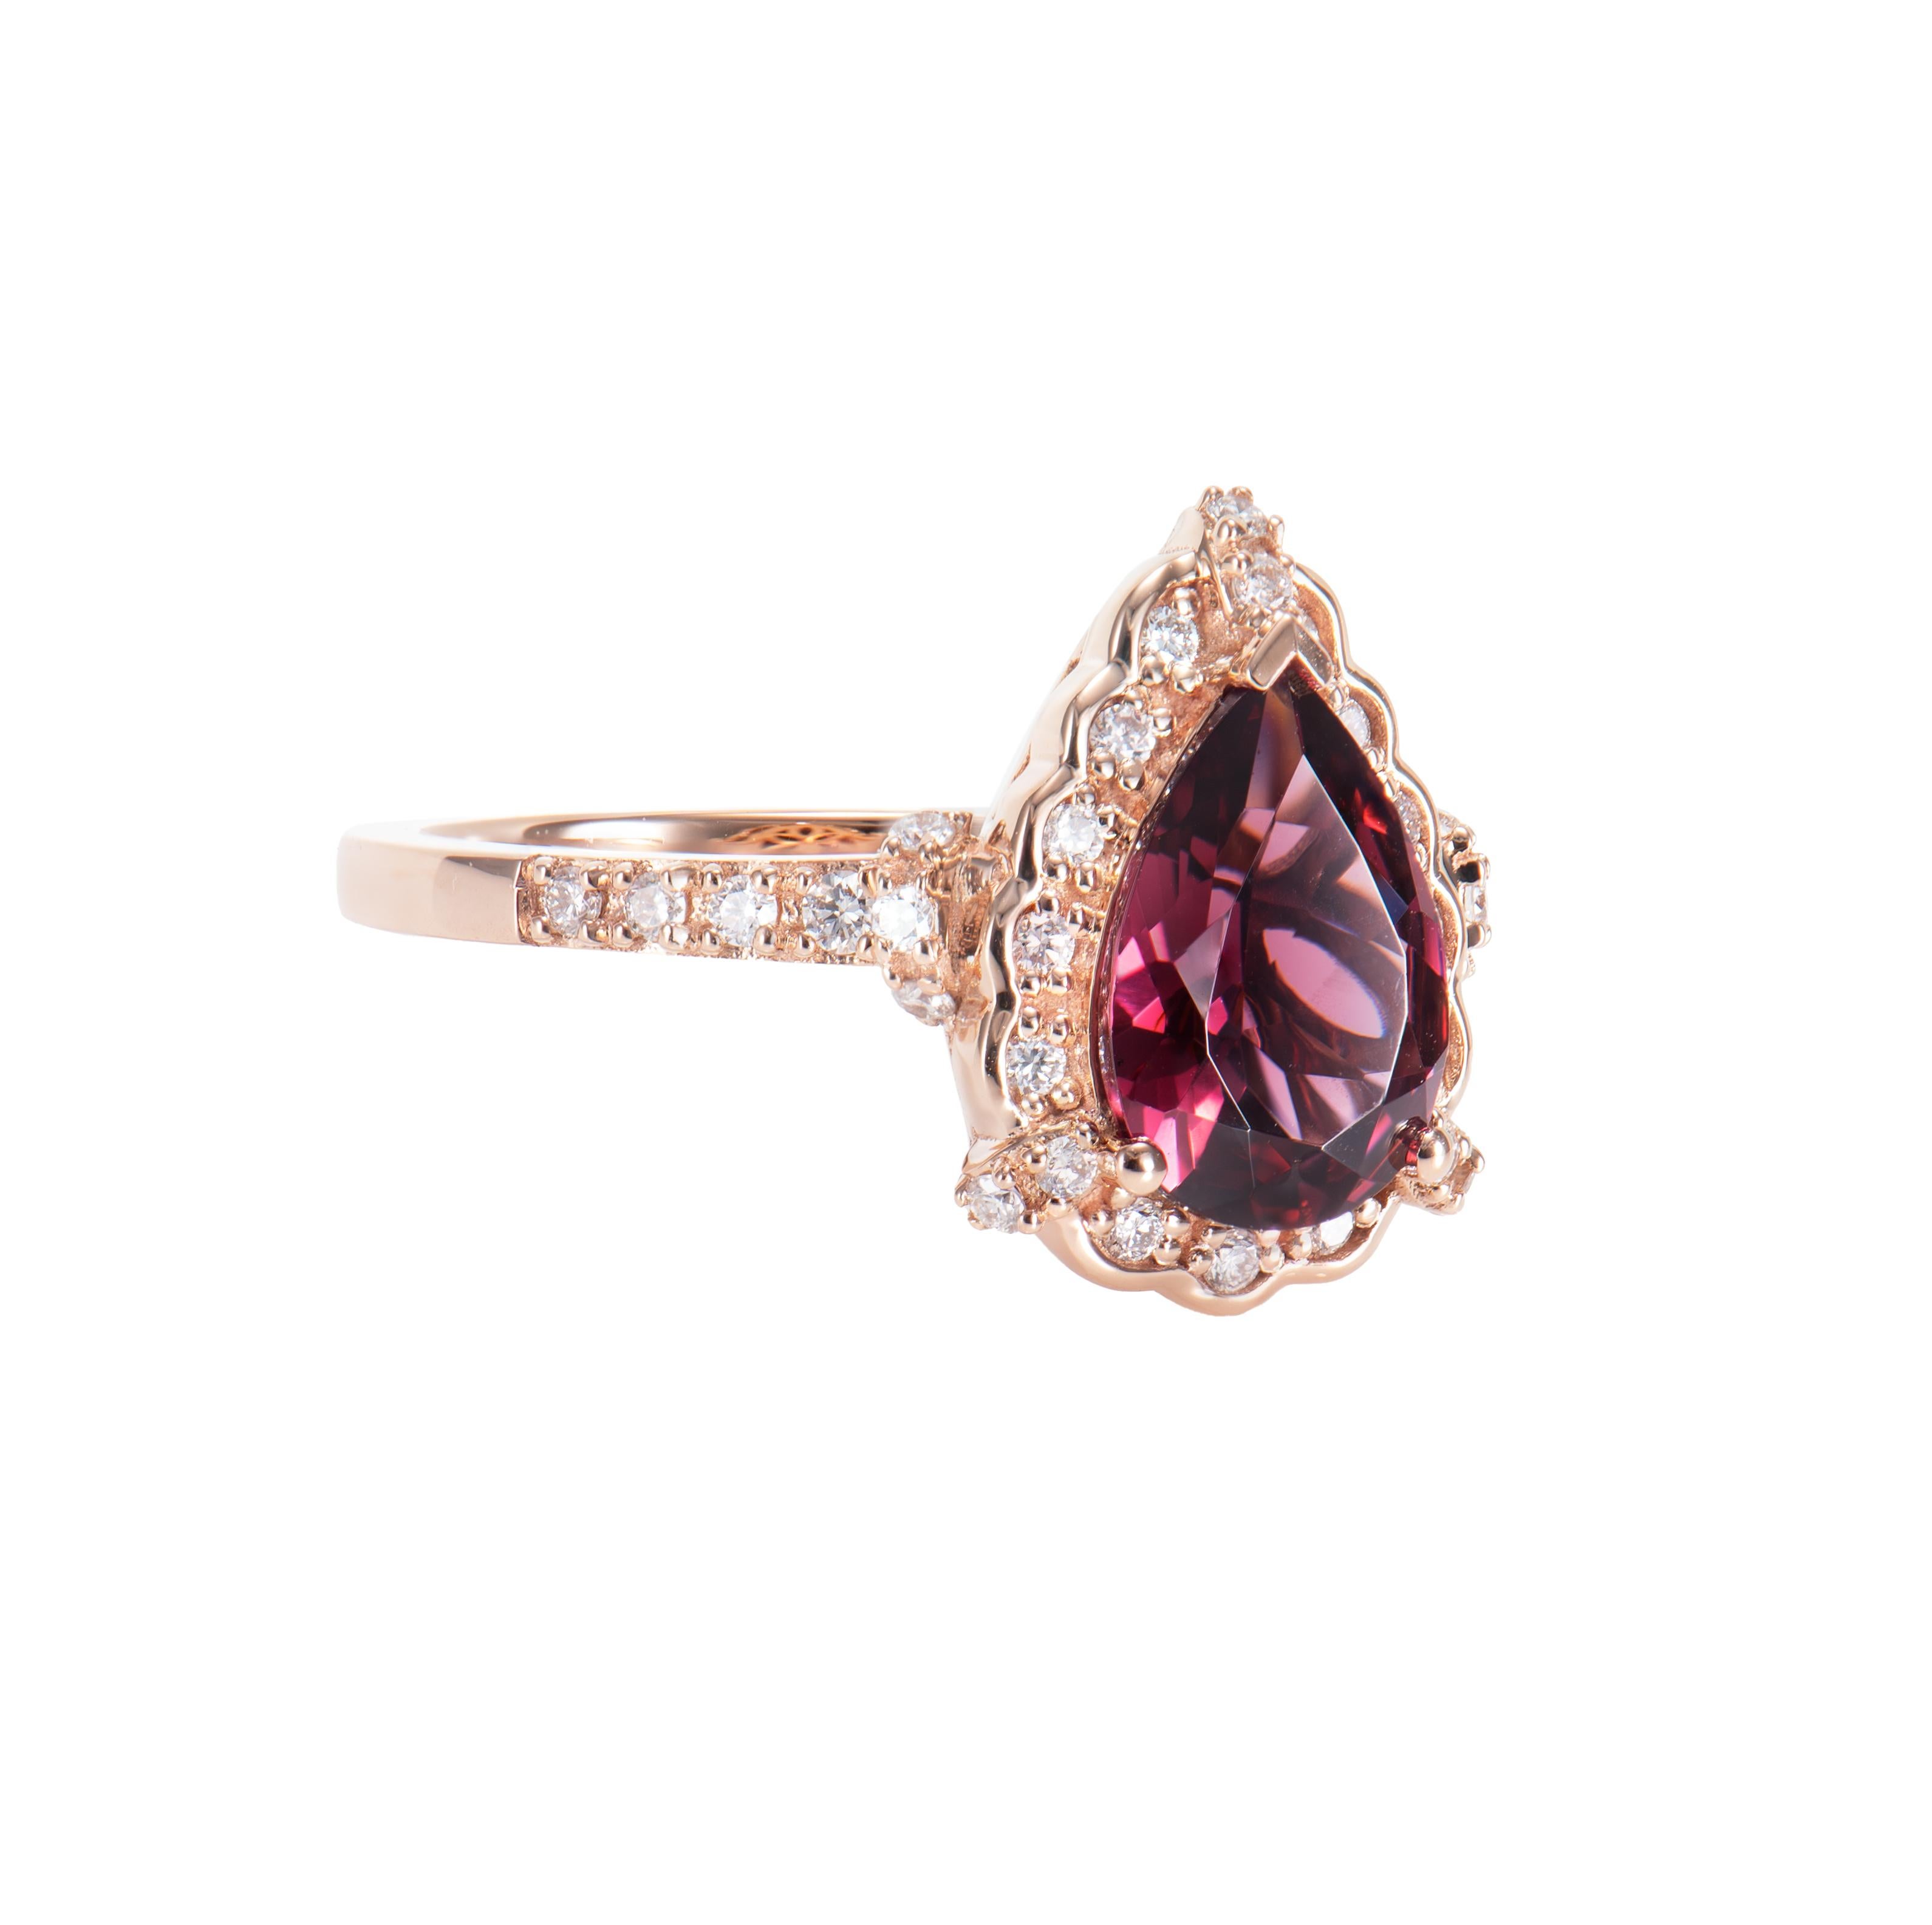 Celebrating Magenta as the color of the year for 2023, we present our exclusive Radiating Rhodolite collection. The magnificent magenta hues in these gems are brought to life in a classic rose gold setting with white diamonds.

Rhodolite and White